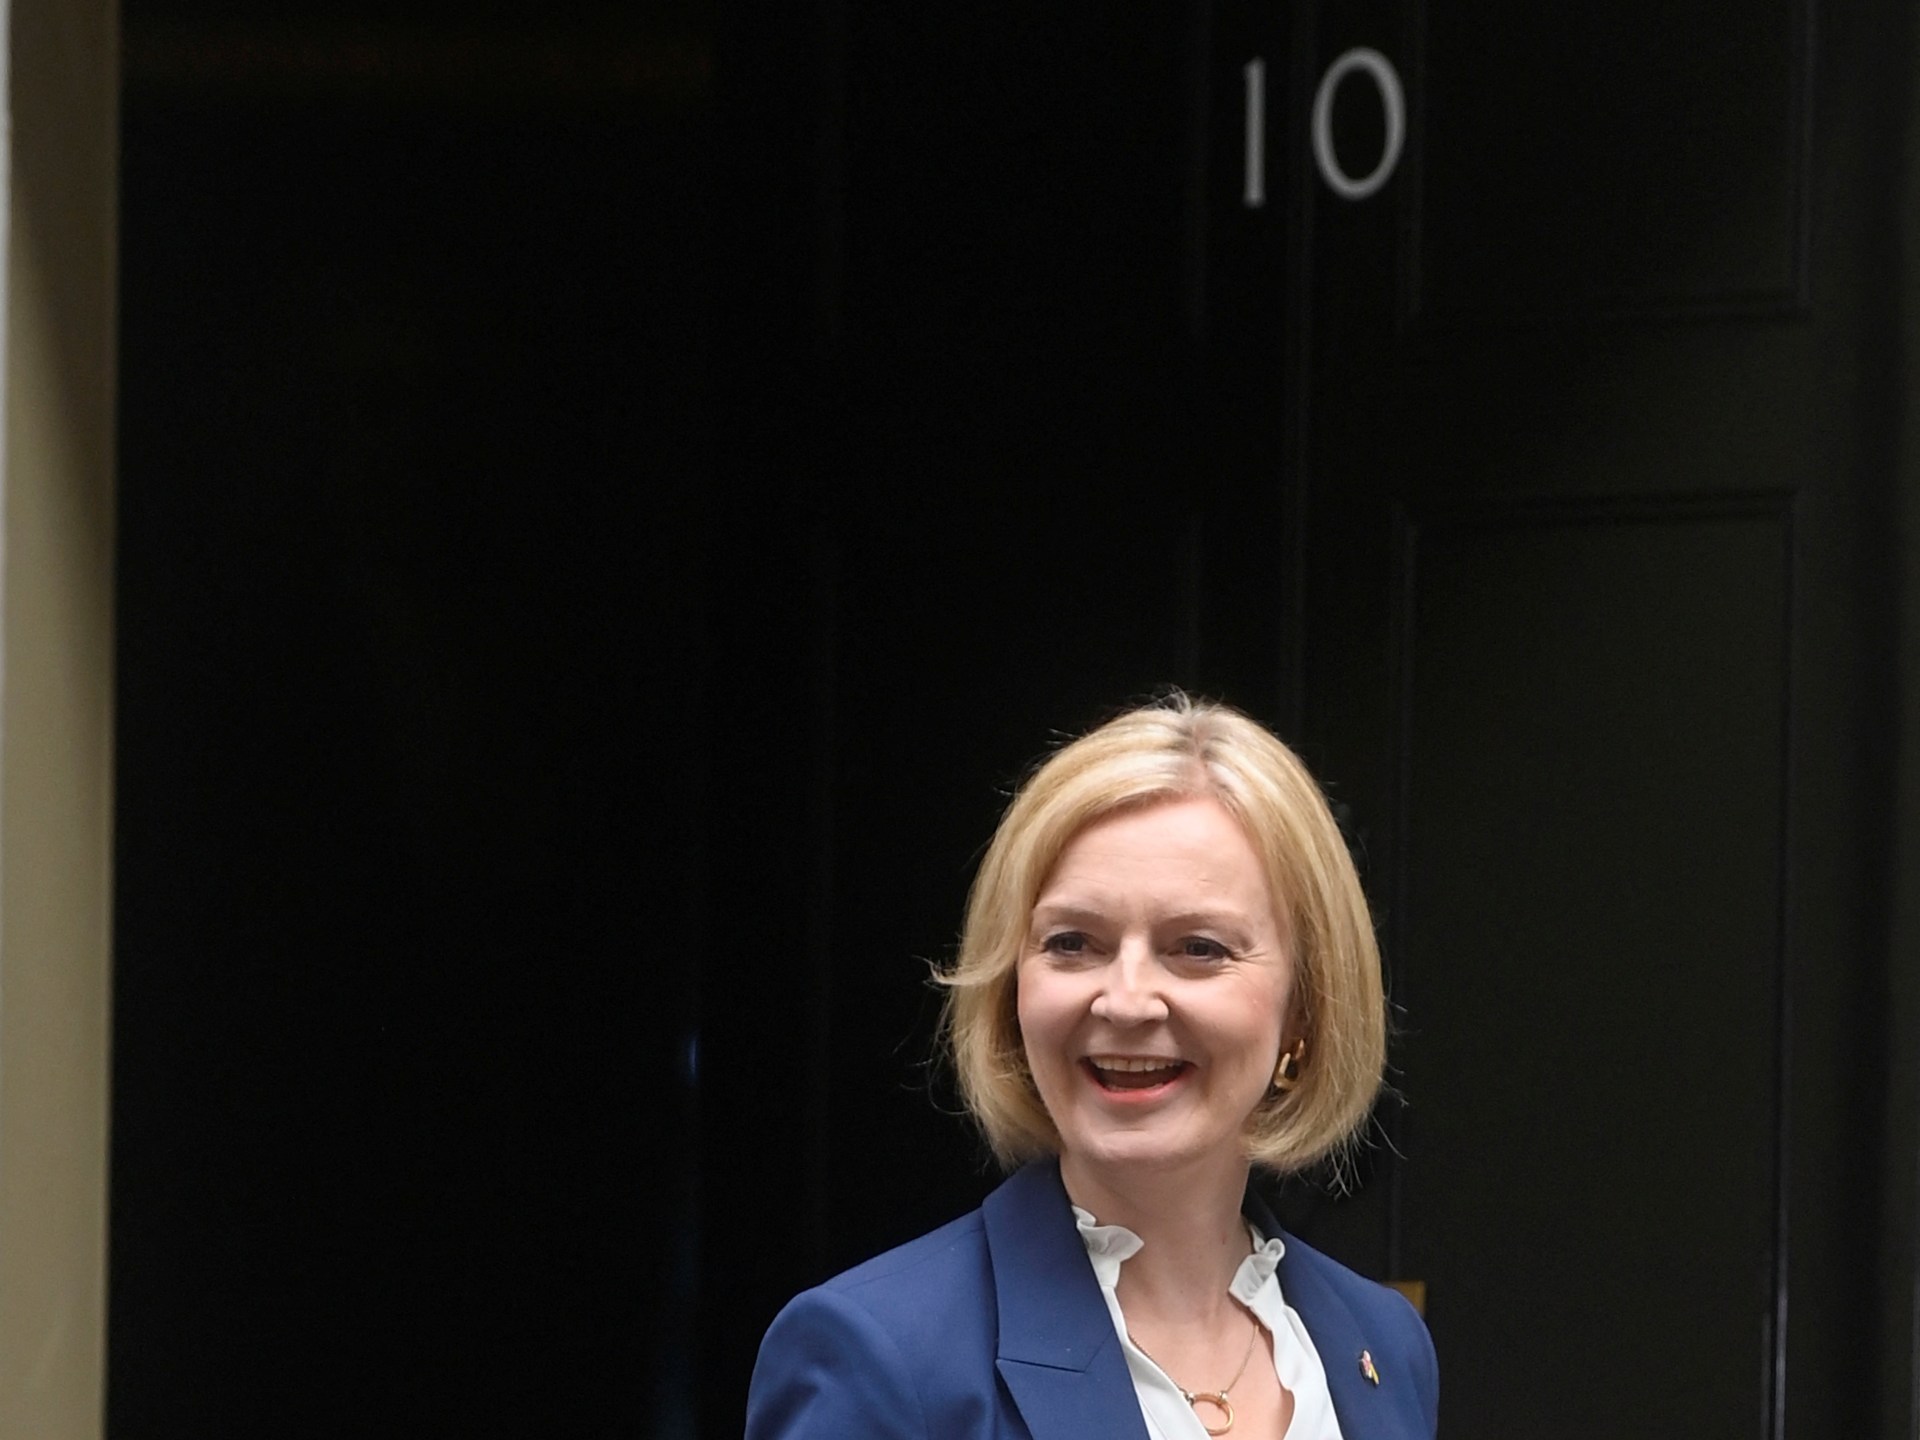 What ought to Ukraine count on from UK’s PM Truss? | Russia-Ukraine conflict